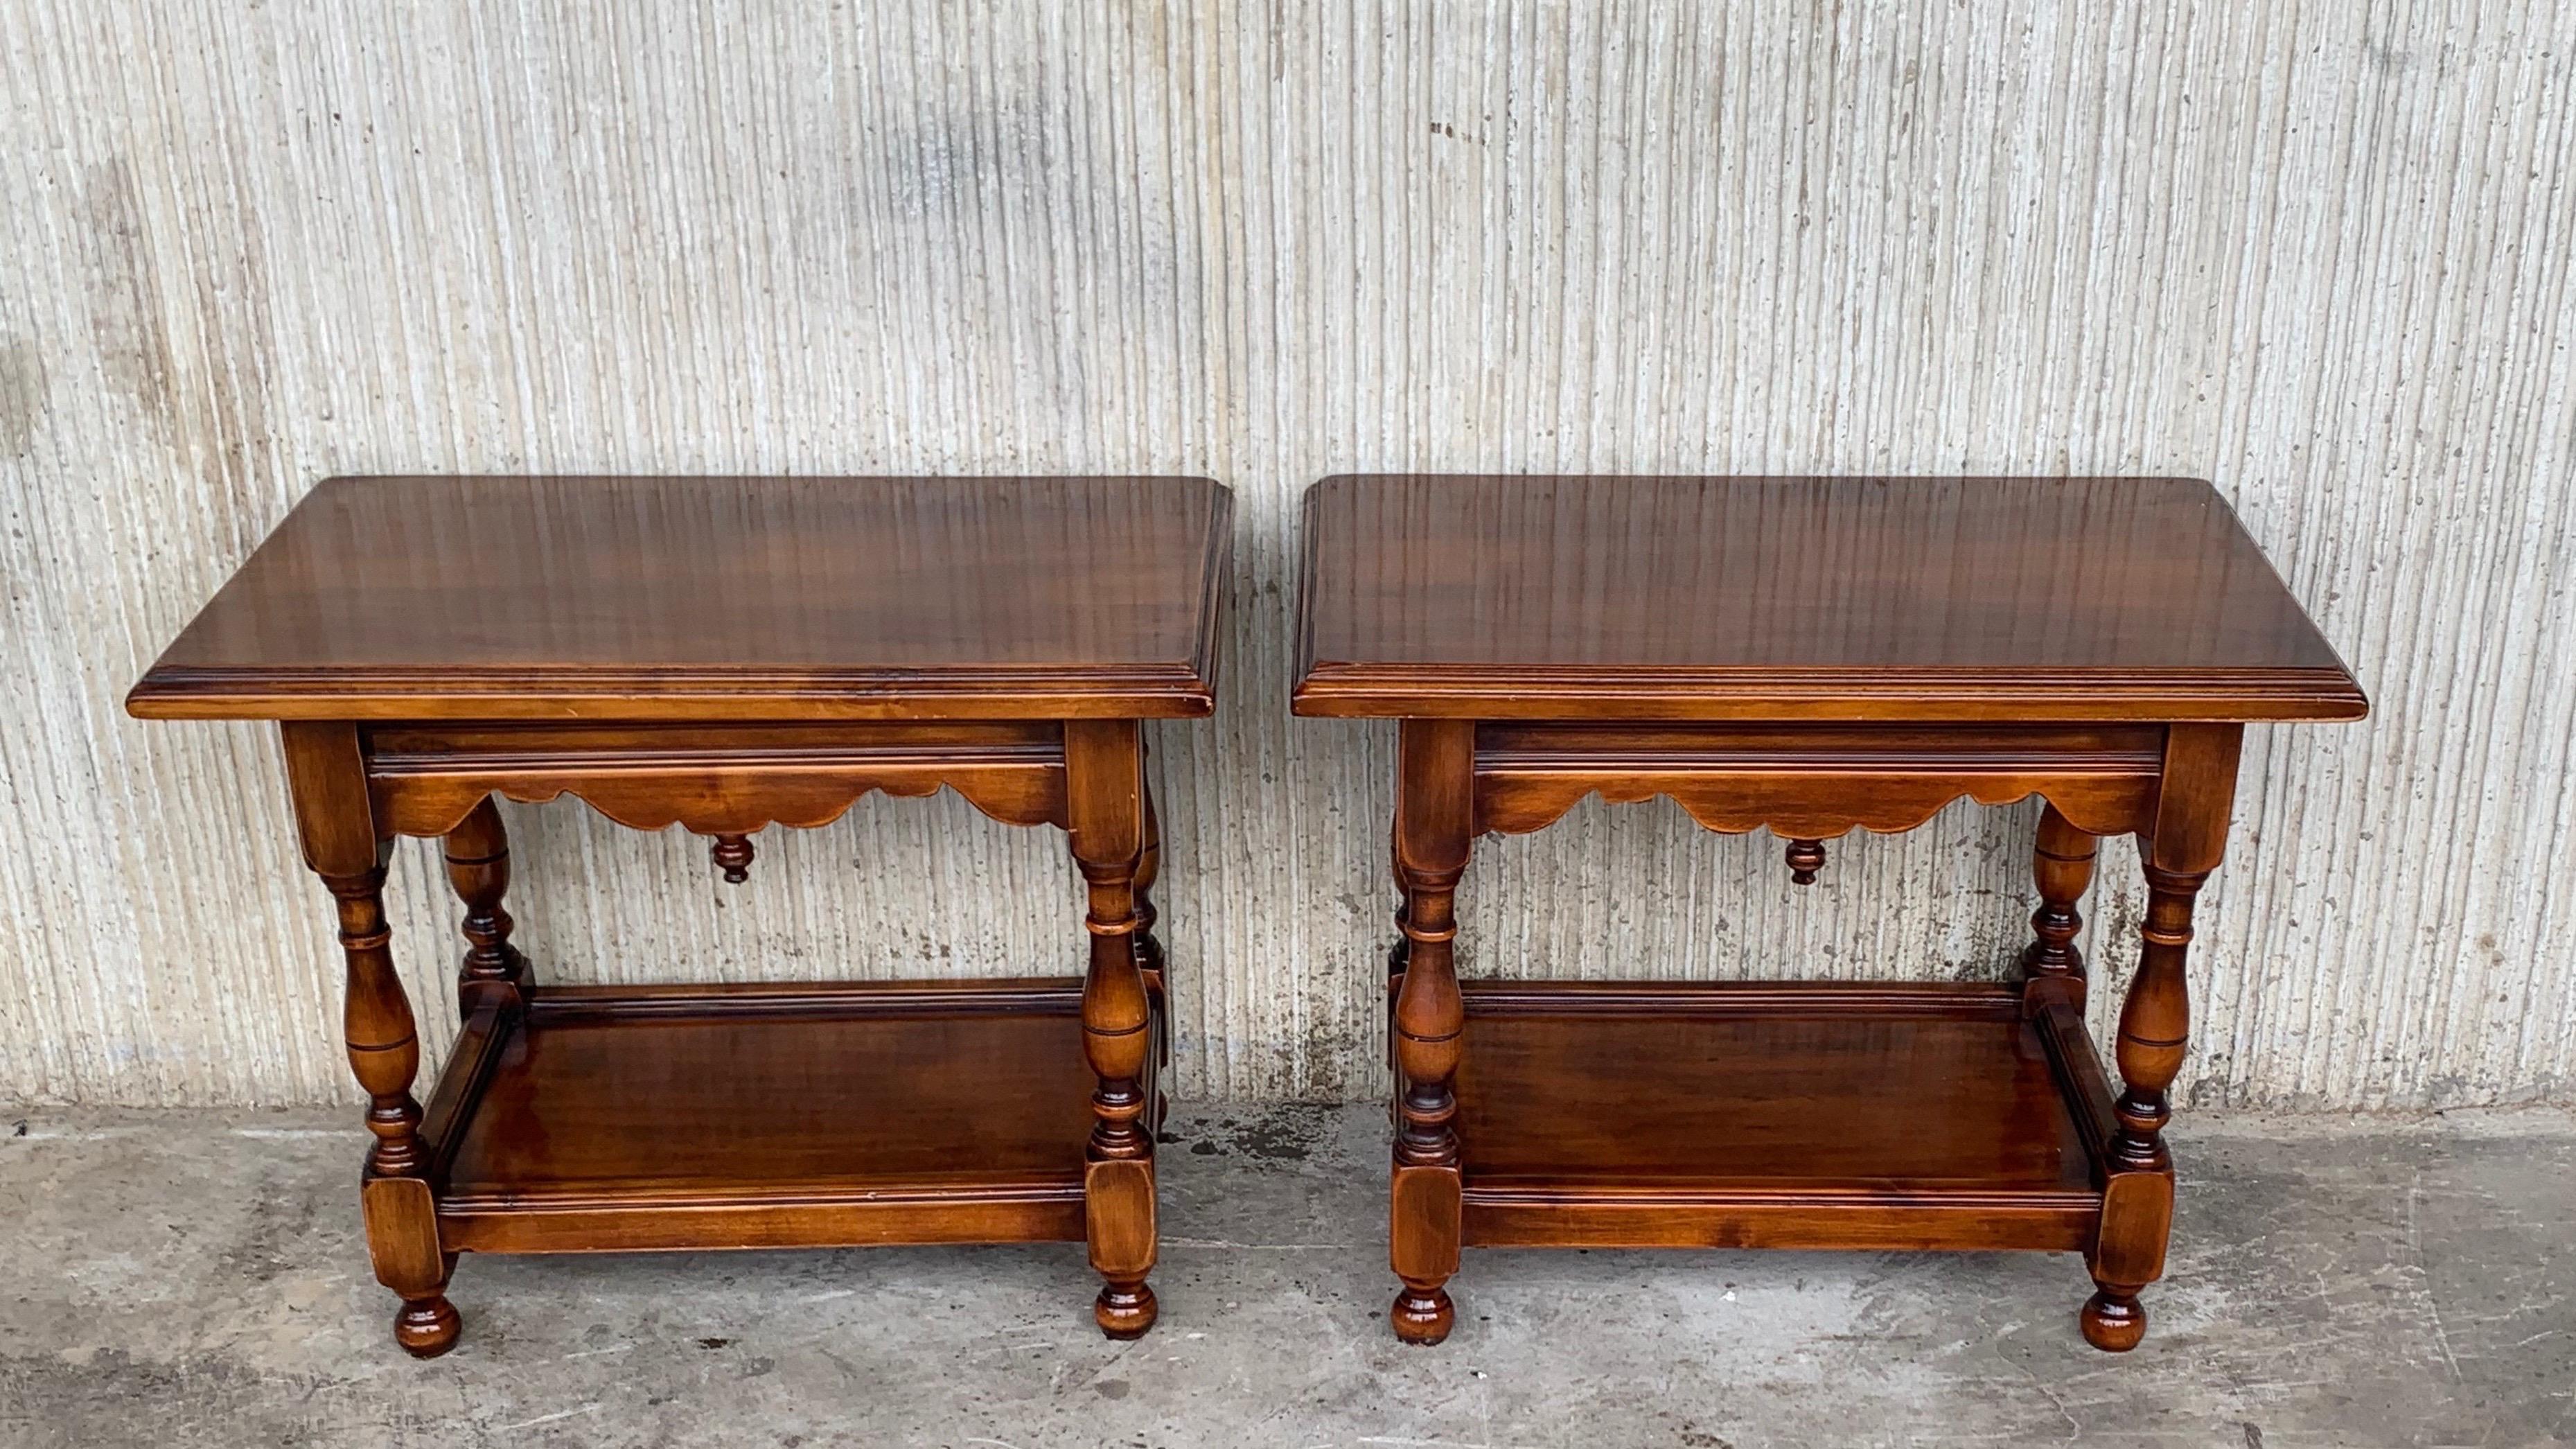 Pair of Spanish nightstands or side, coffee tables in walnut with two shelves.
The legs are turned and the top has a carved inferior detail.